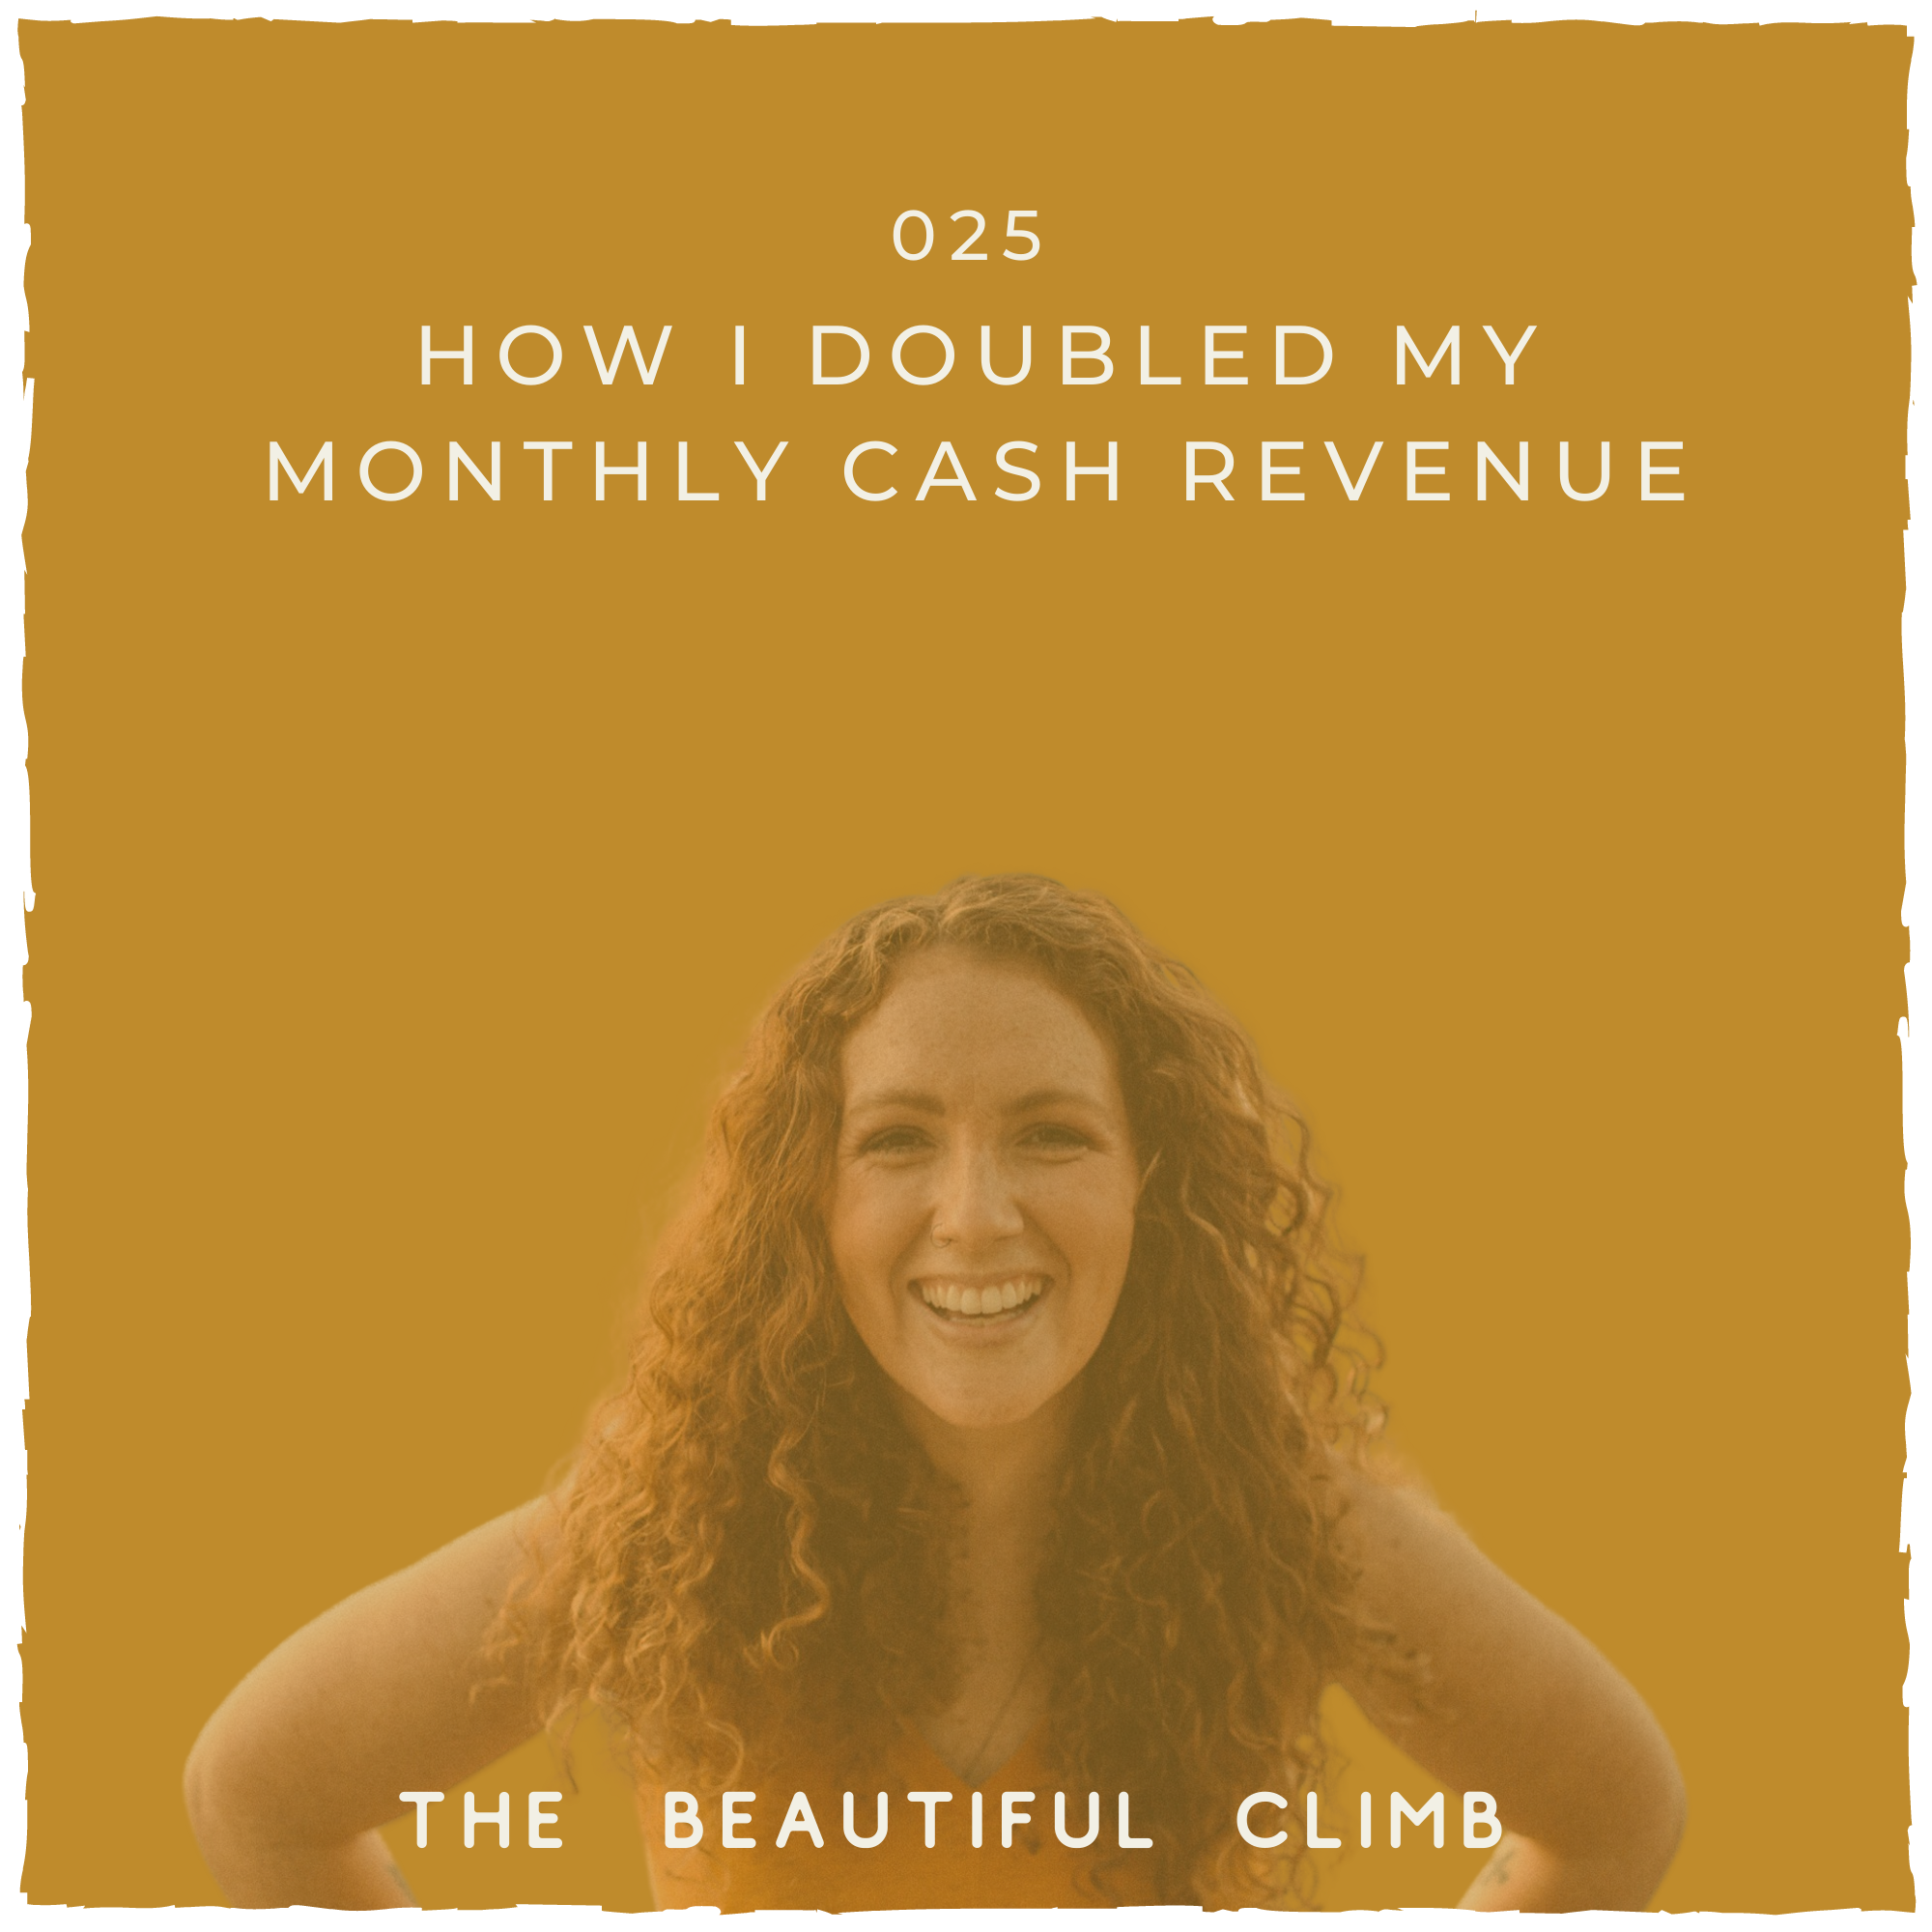 On Episode 25 of The Beautiful Climb Podcast, Michelle Knight talks about The Mindset Work That Doubled My Monthly Cash Income. In this episode, you'll learn: Why mindset is necessary when wanting to increase your revenue or really do anything that feels impossible, scary or challenging...hello money! The 3 shifts I personally had to make in order to move to a place where I felt open to receiving and keeping the money I desired. 3 actionable steps you can take to begin doing the inner work on your money story and move towards your desired life of freedom (and yes that requires cash flow)! | MichelleKnight.co